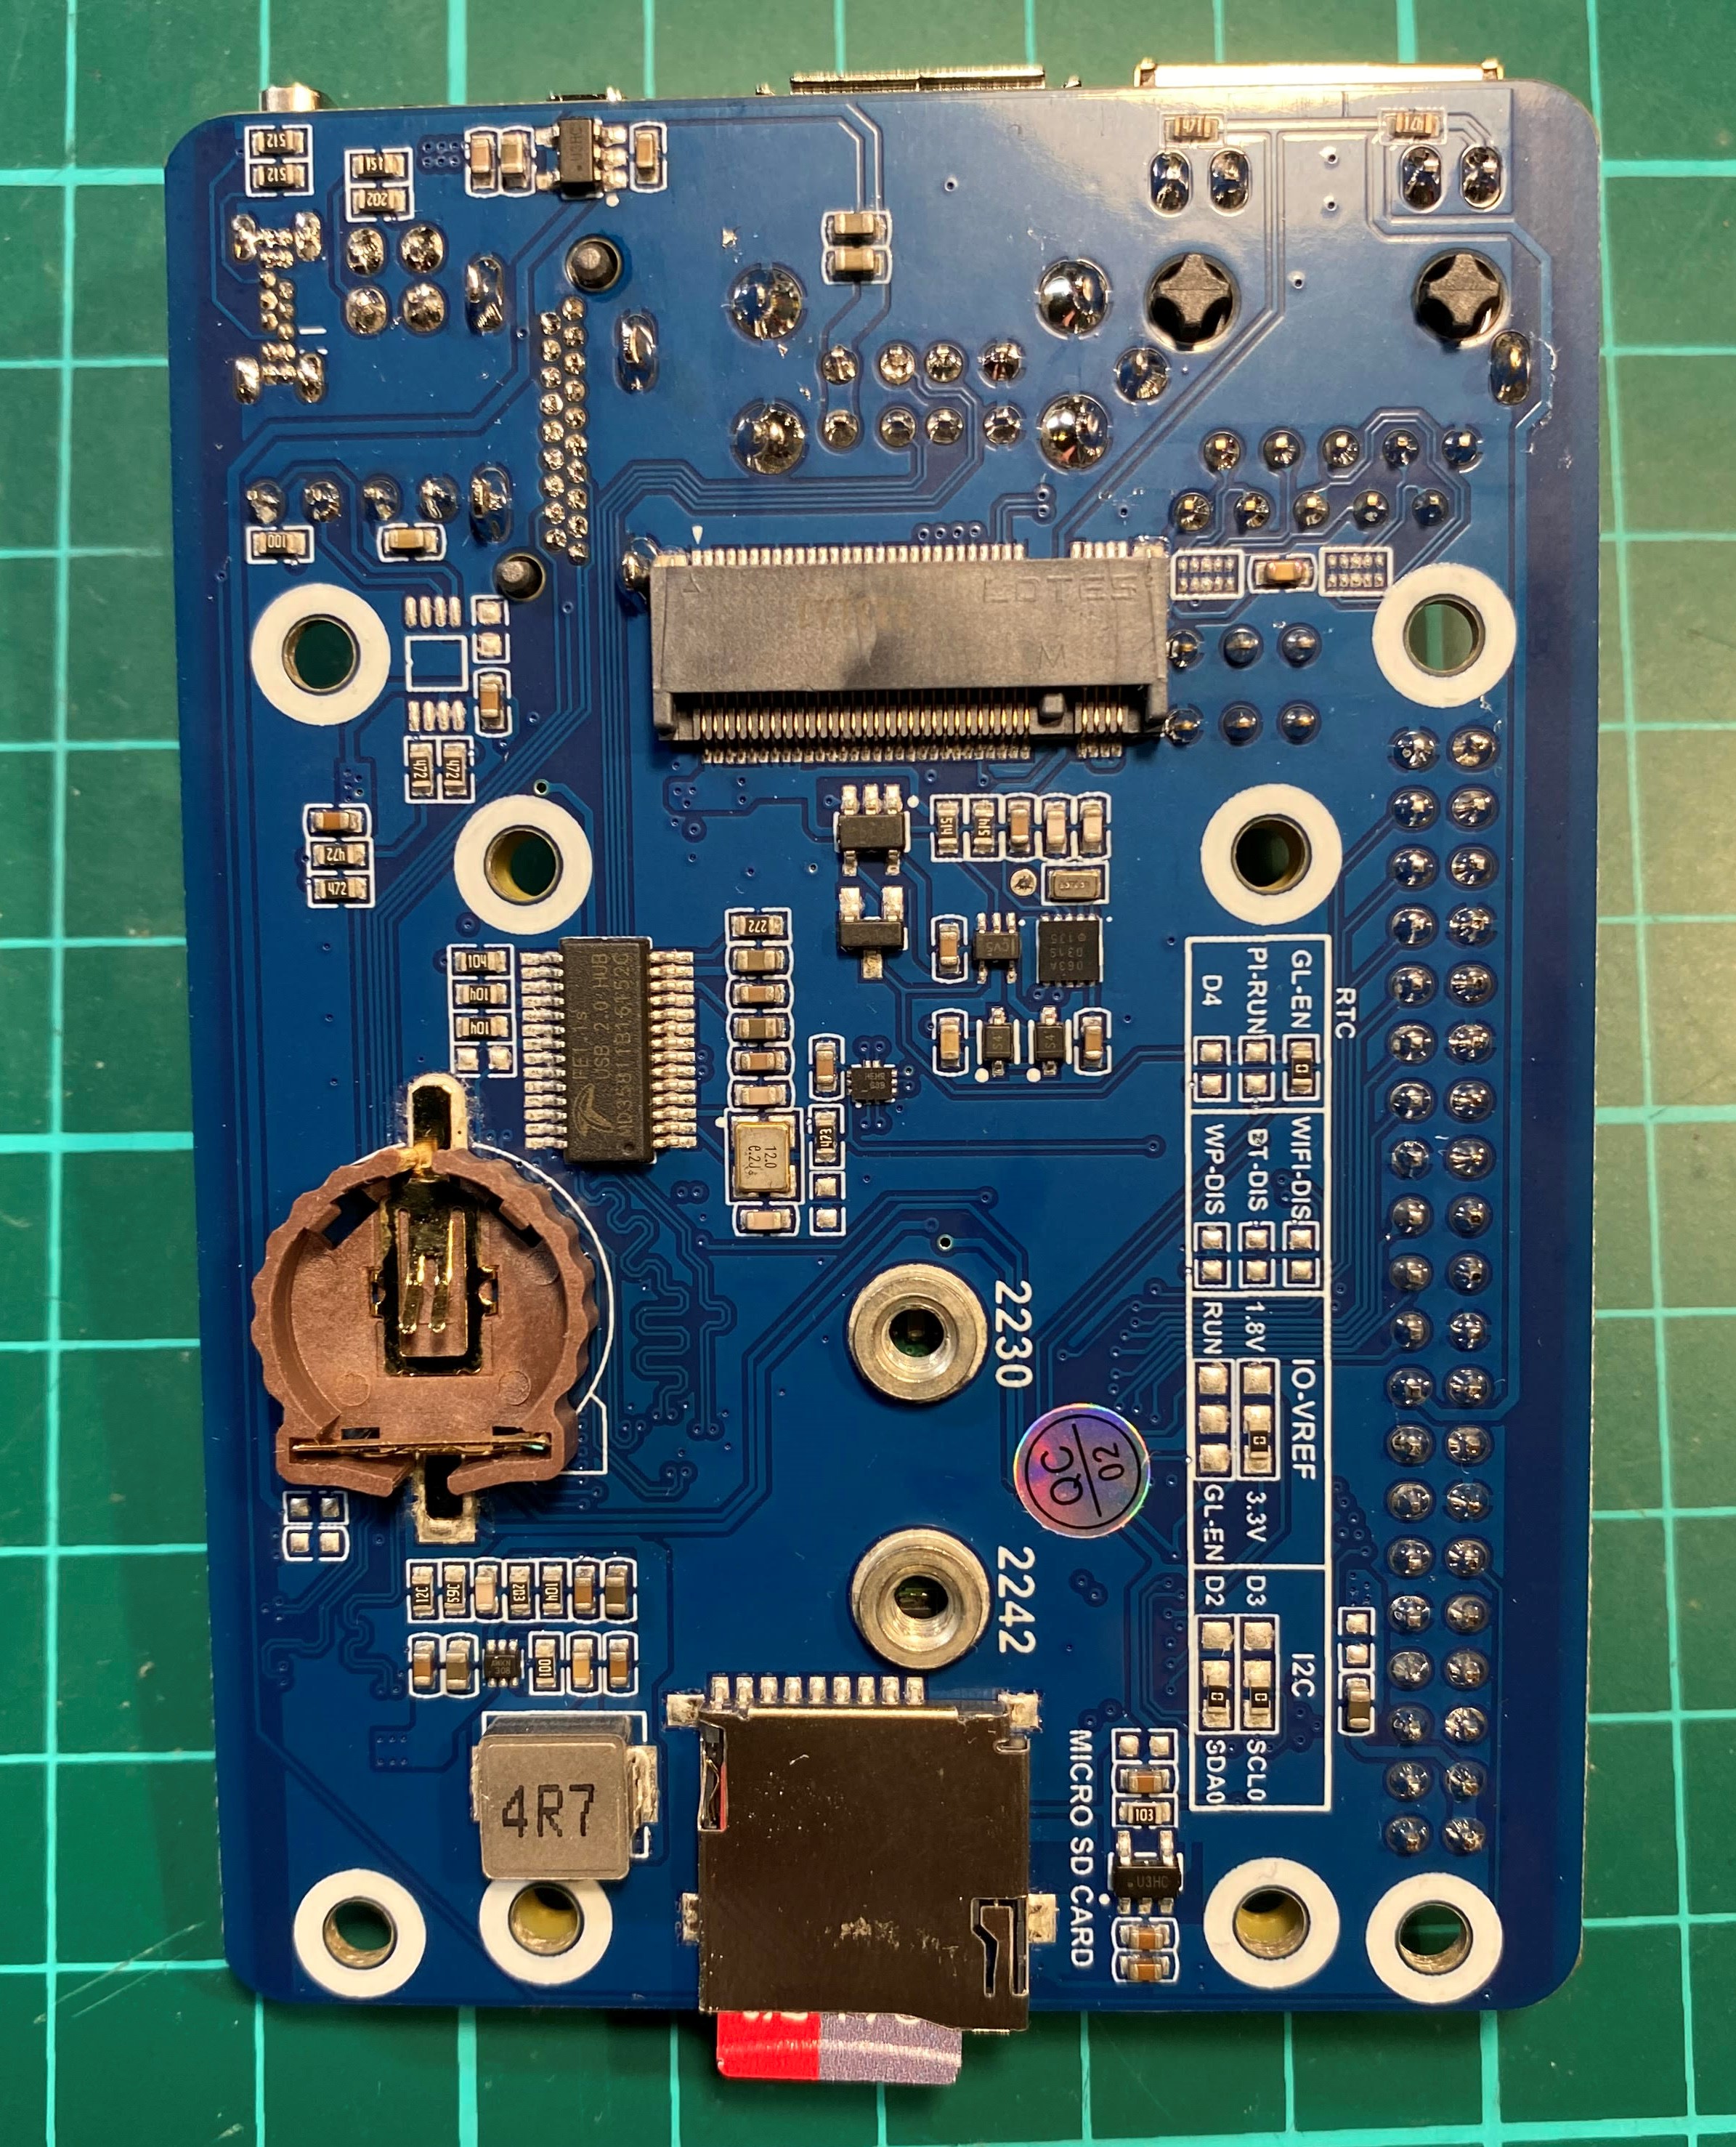 Waveshare base board, upside down, showing off its ass, sorry I mean its M2 connector